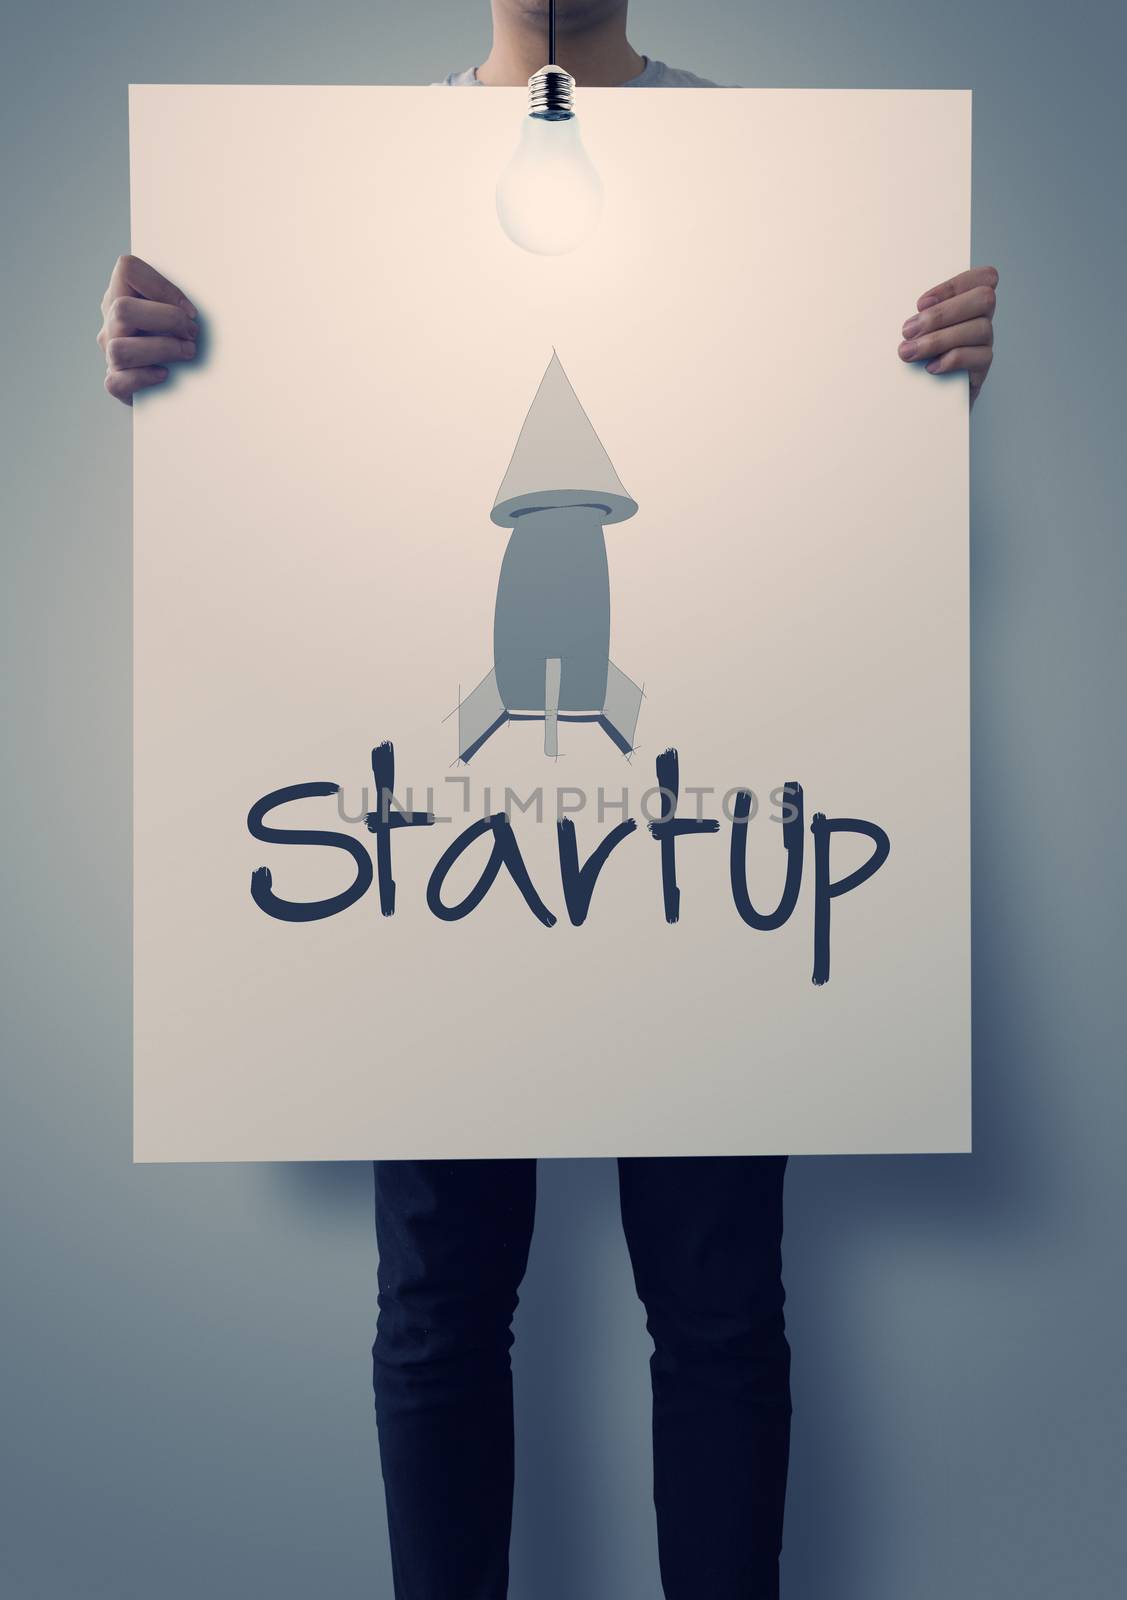 businessman hand showing poster of start up icon as concept  by everythingpossible